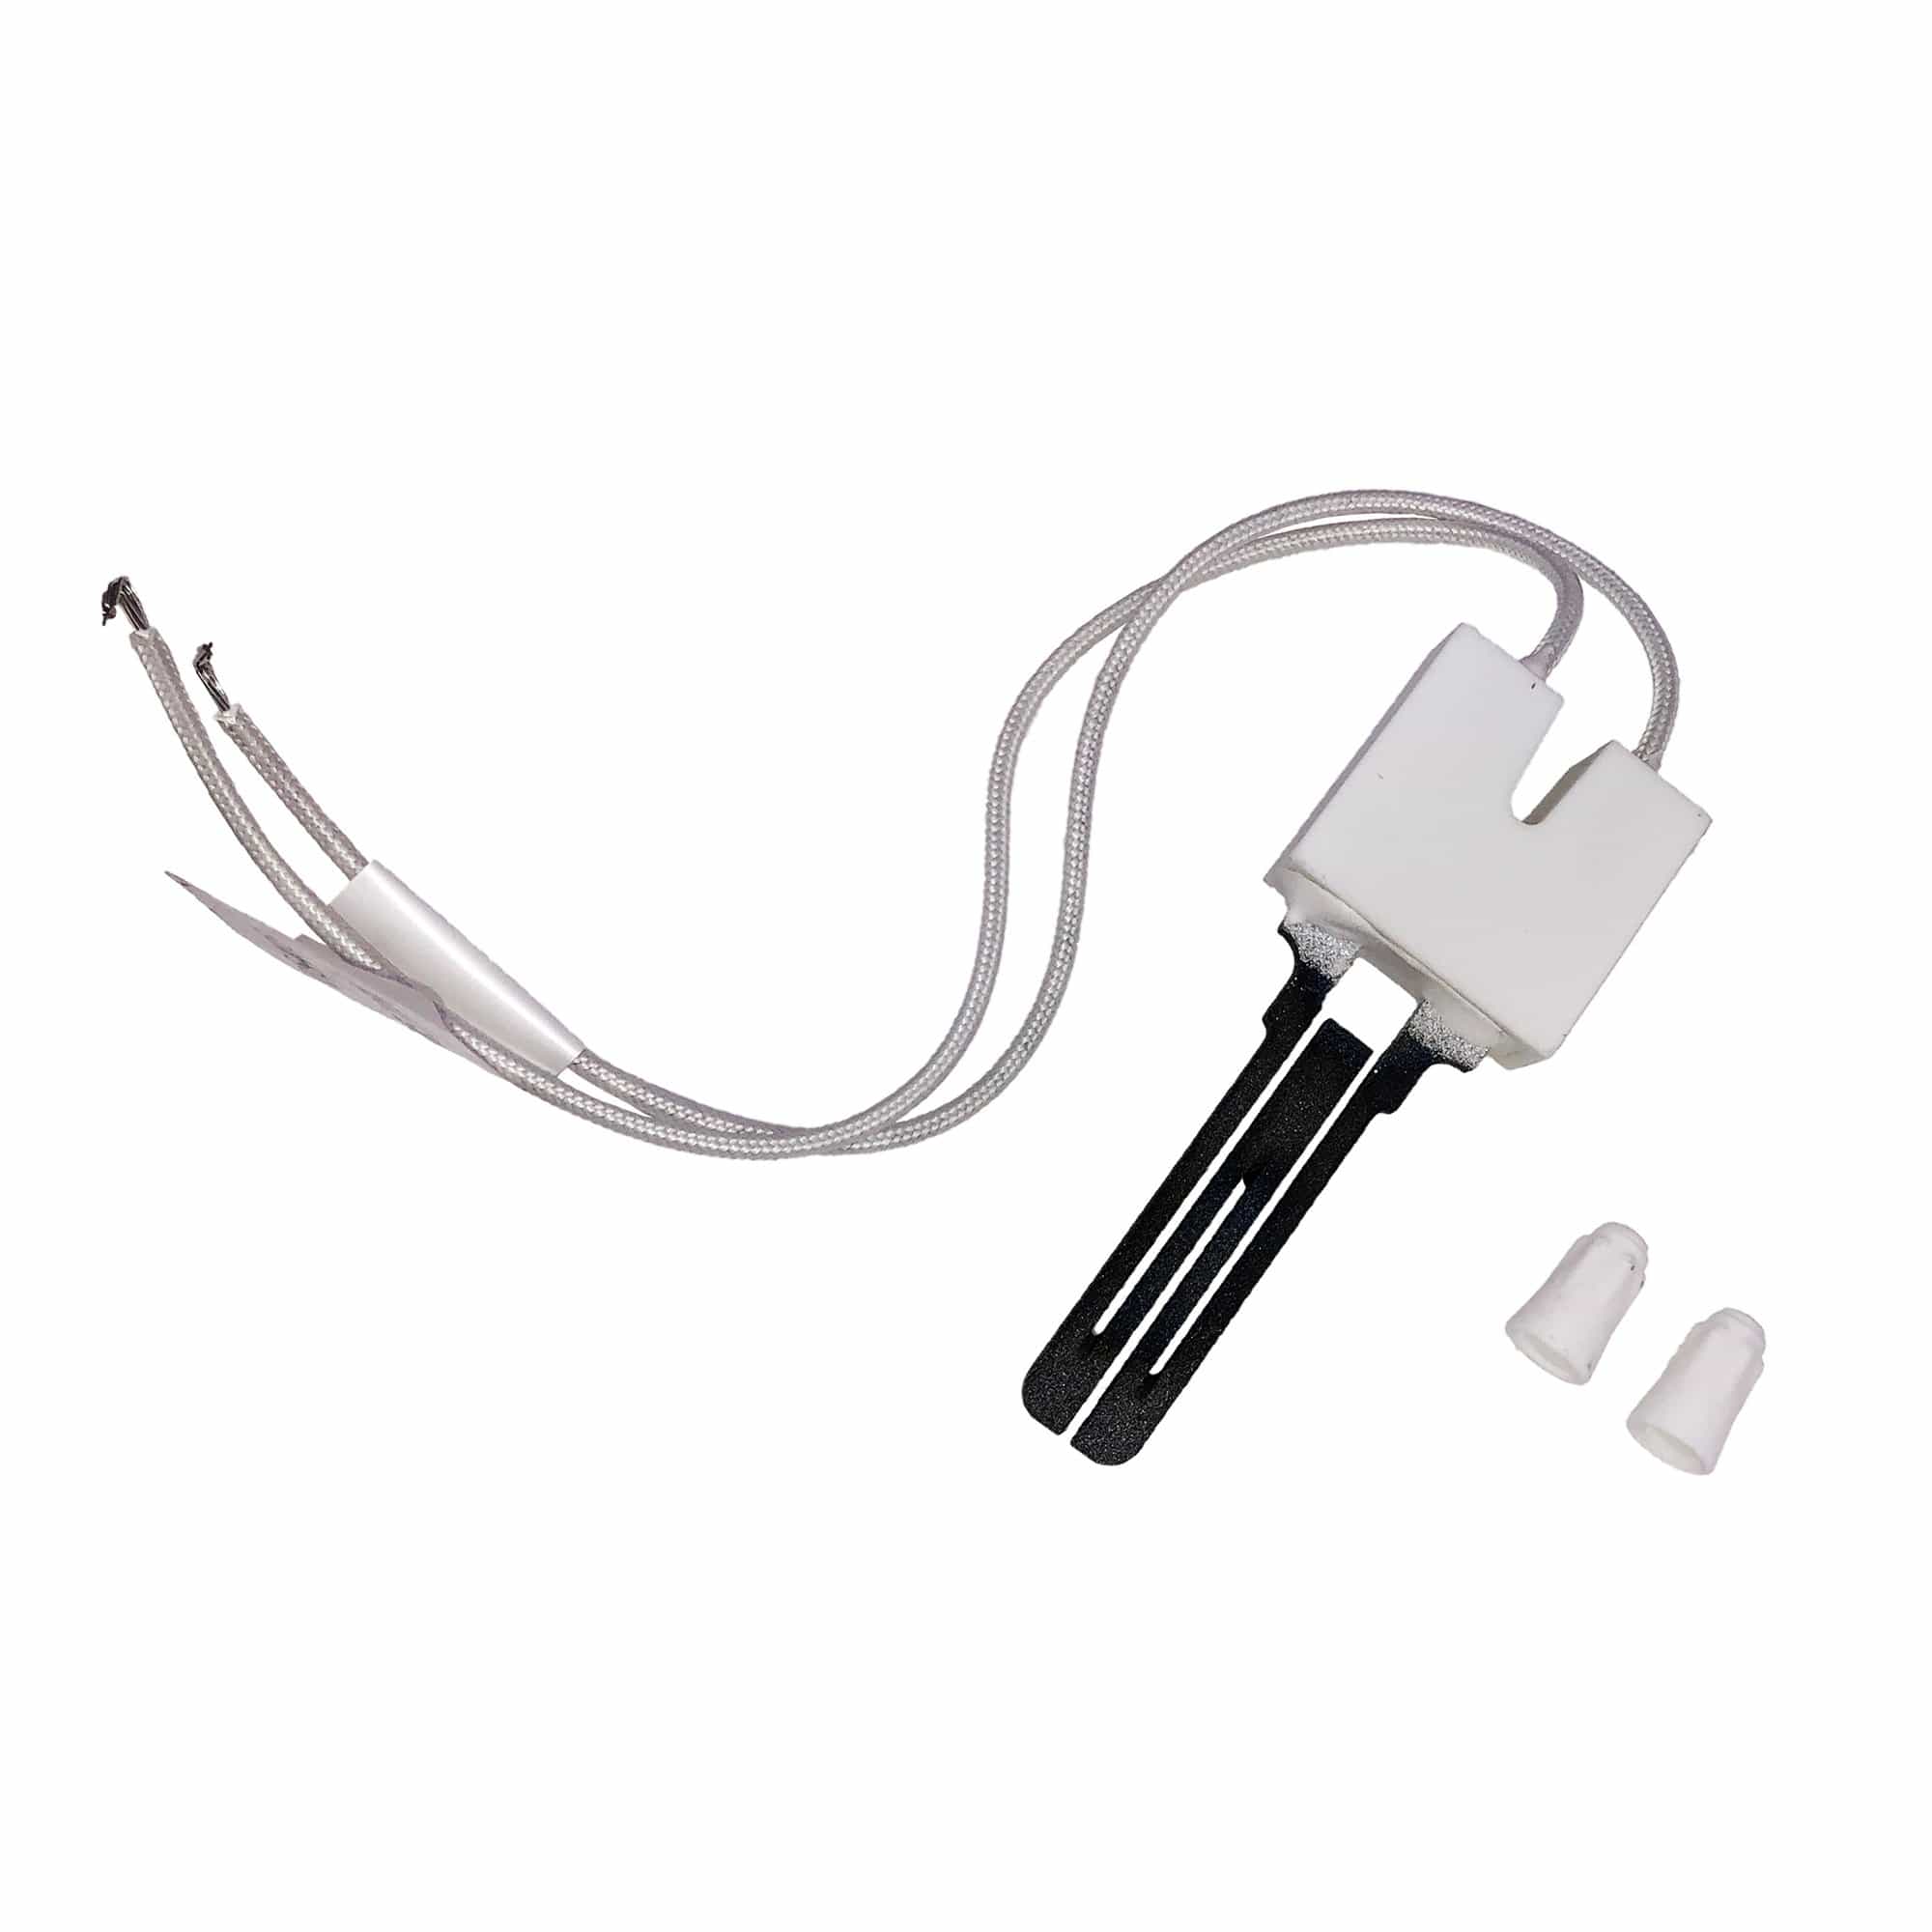 Packard IG1405 Flat Silicon Carbide Igniter